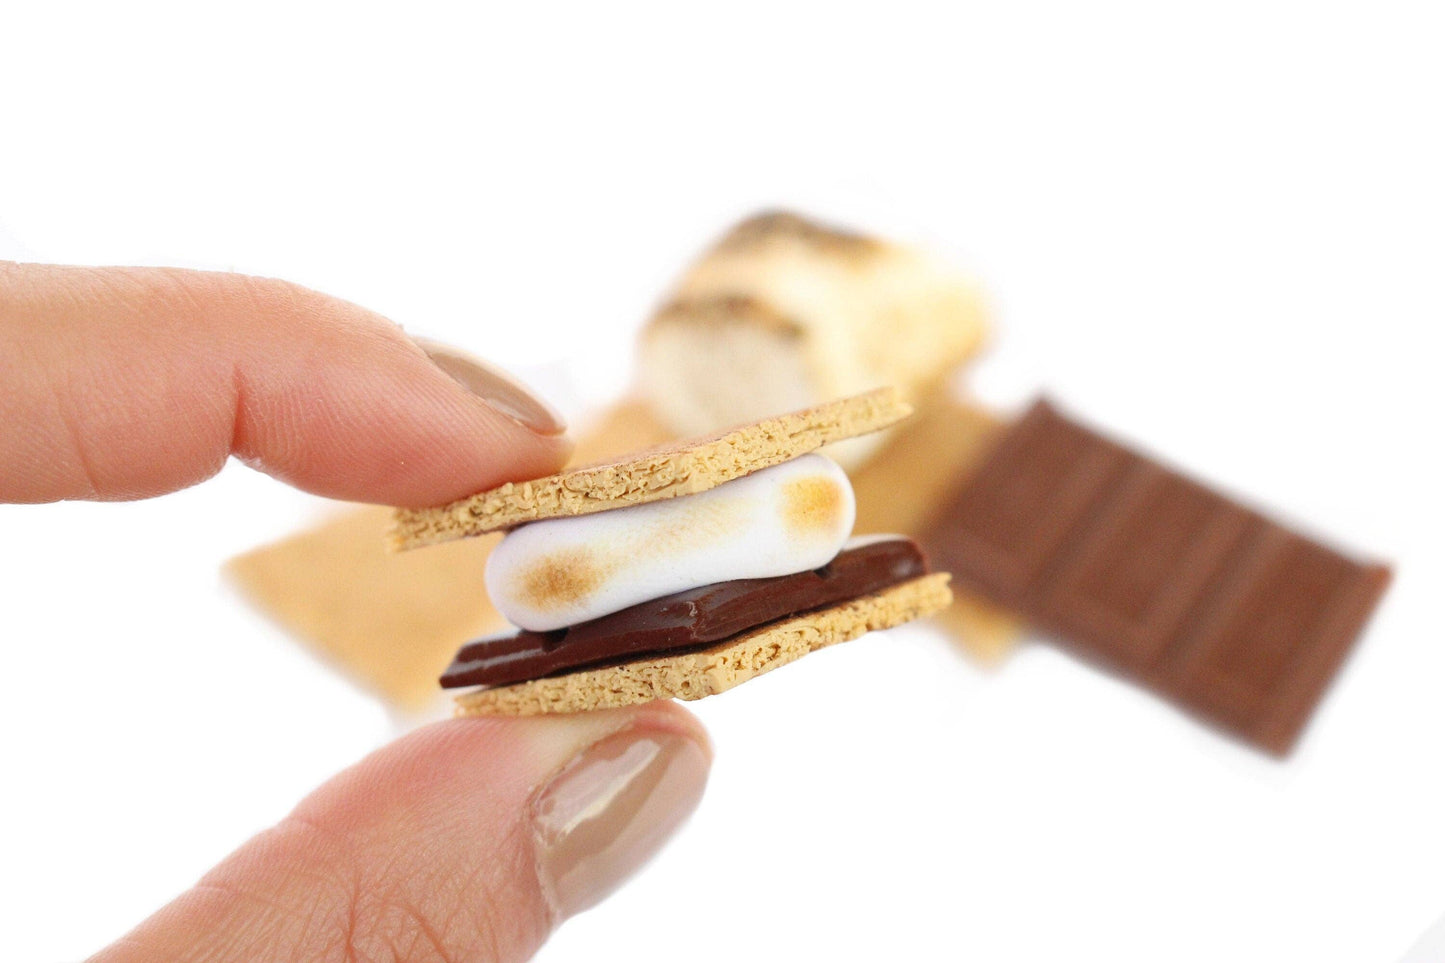 Magnet shaped like a single s'more - toasted marshmallow on chocolate, sandwiched between two triangles of graham cracker. Shown held between two fingers for size comparison.